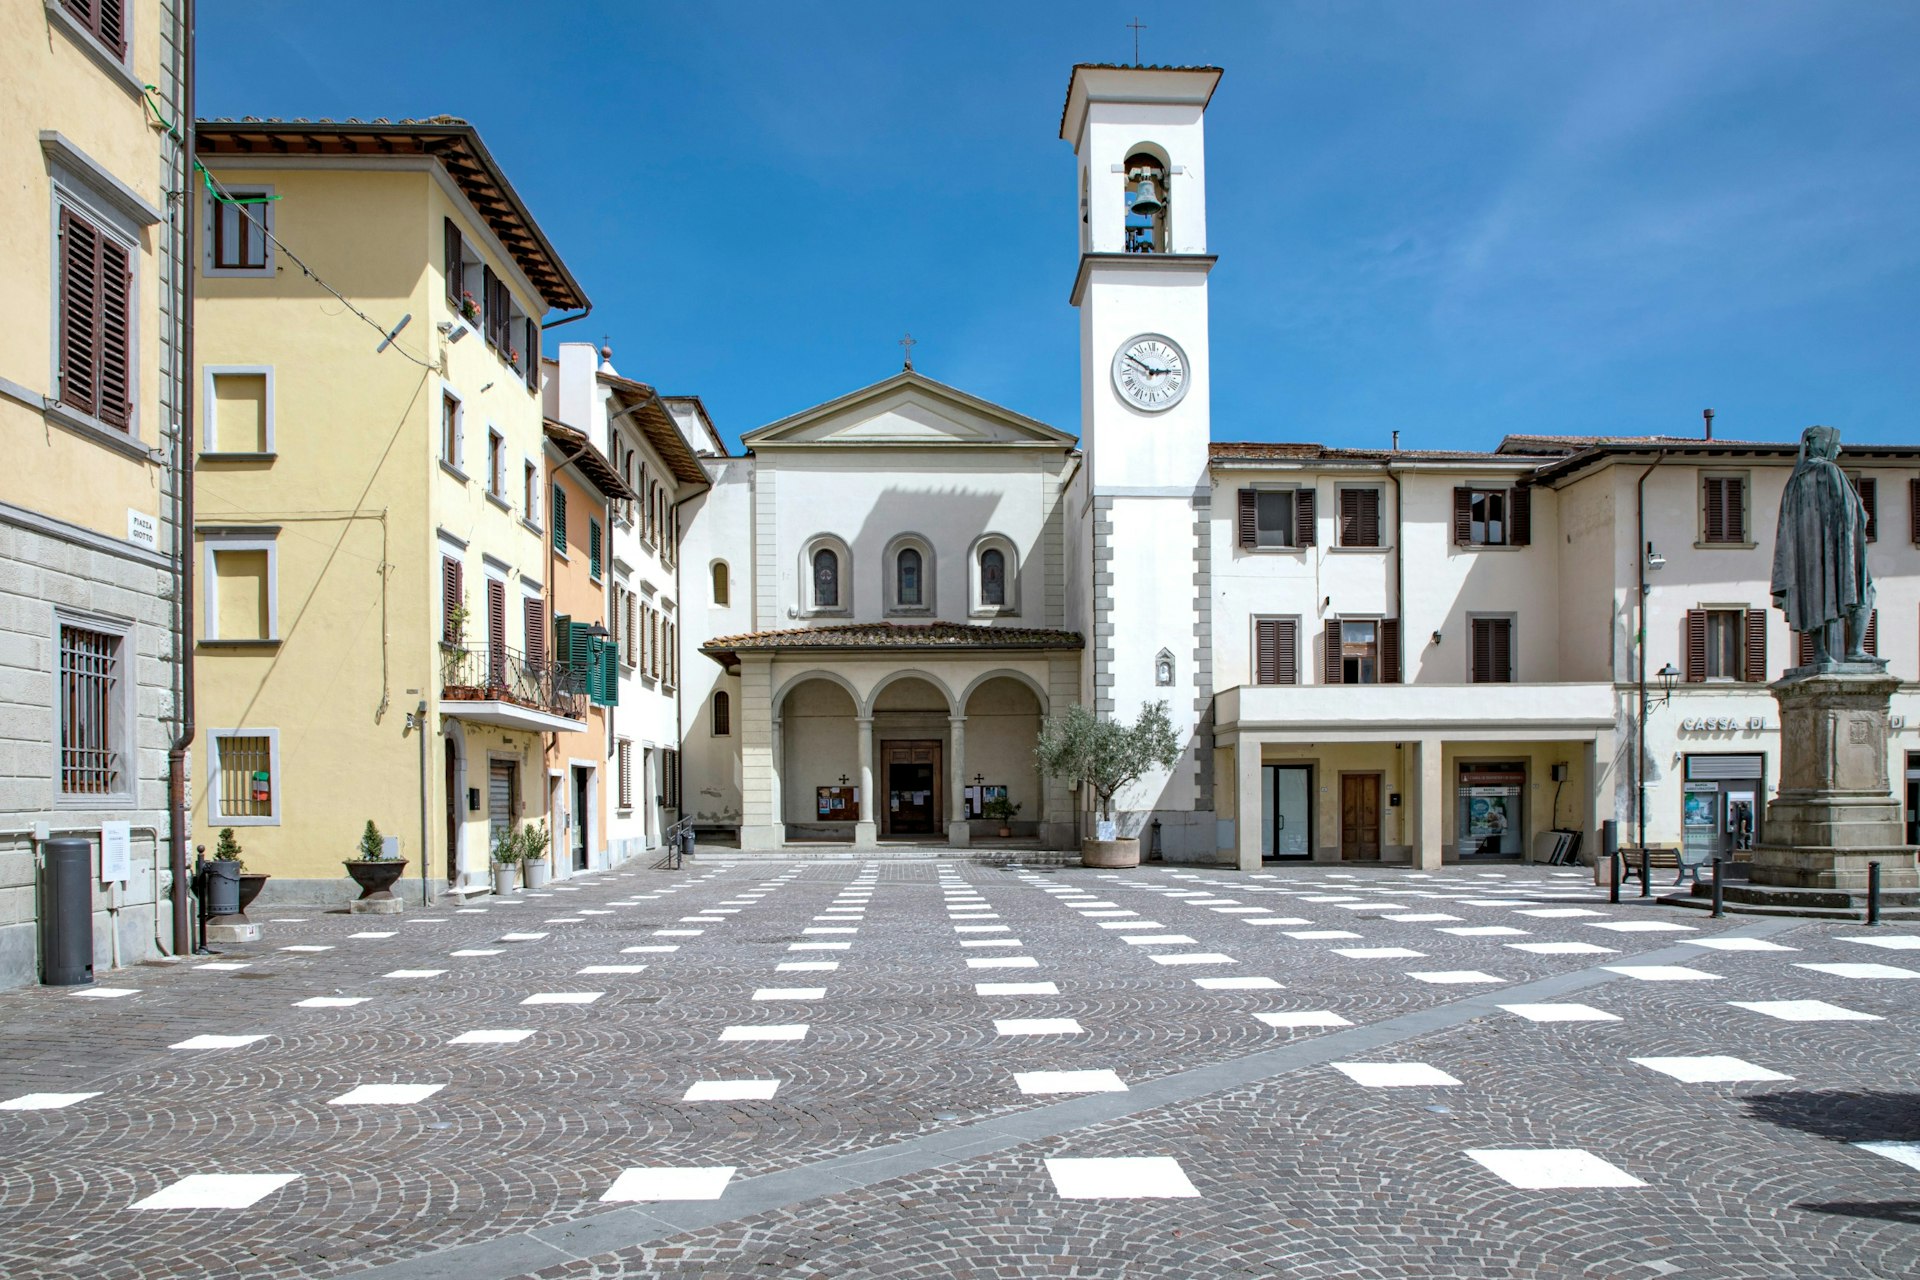 The StoDistante installation located on Piazza Giotto in the town of Vicchio in Italy